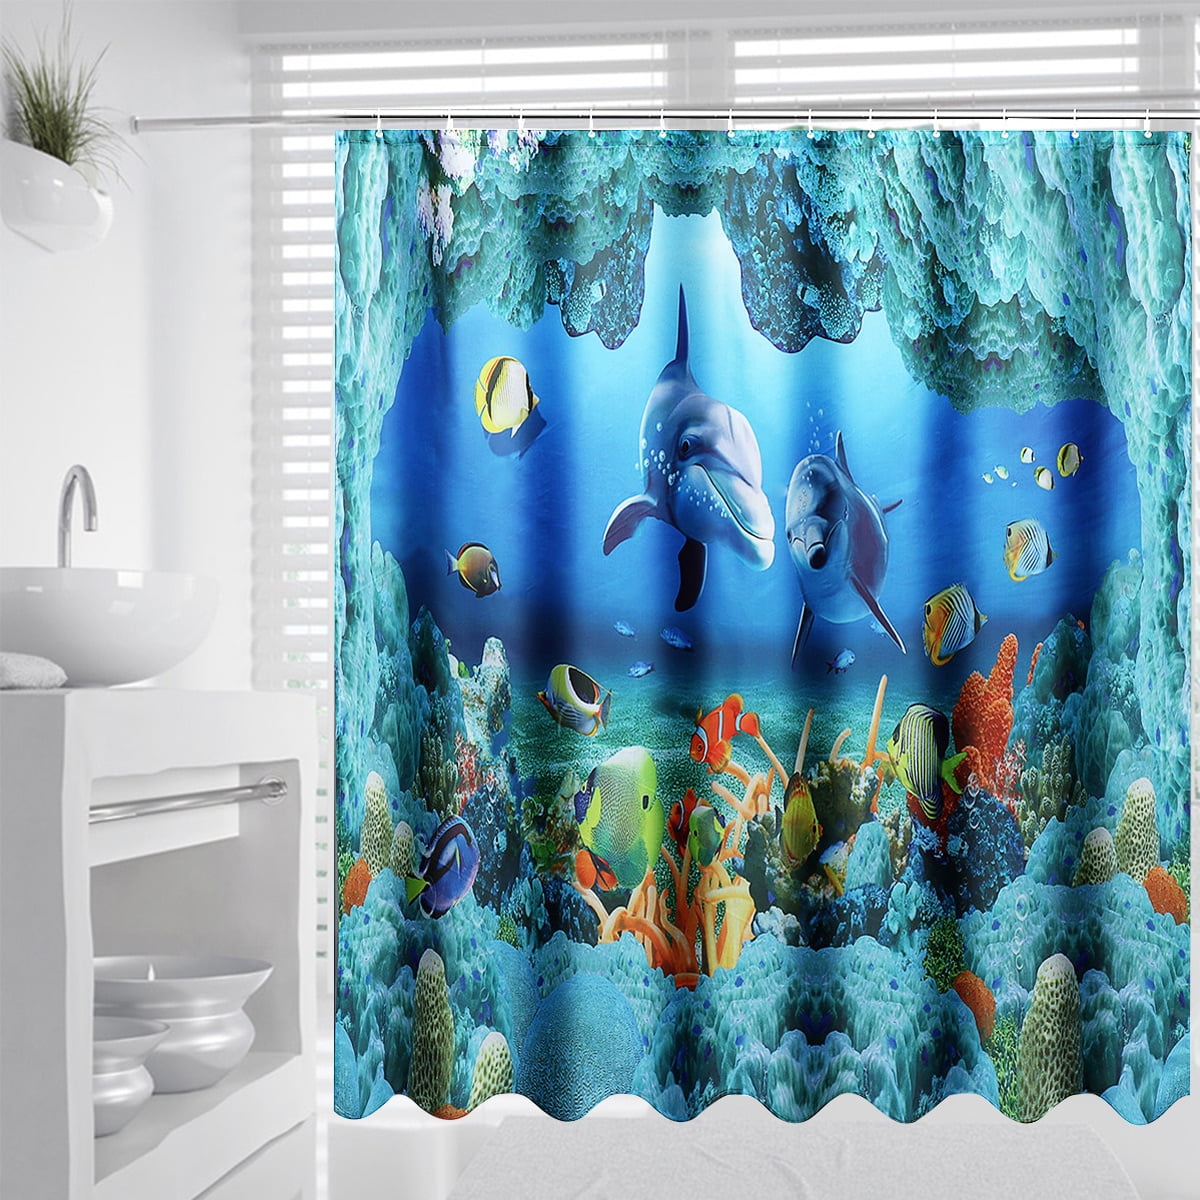 NEW COMMERCIAL PACKAGED 71" x 71" TROPICAL FISH SHOWER CURTAIN WITH HOOKS!!! 